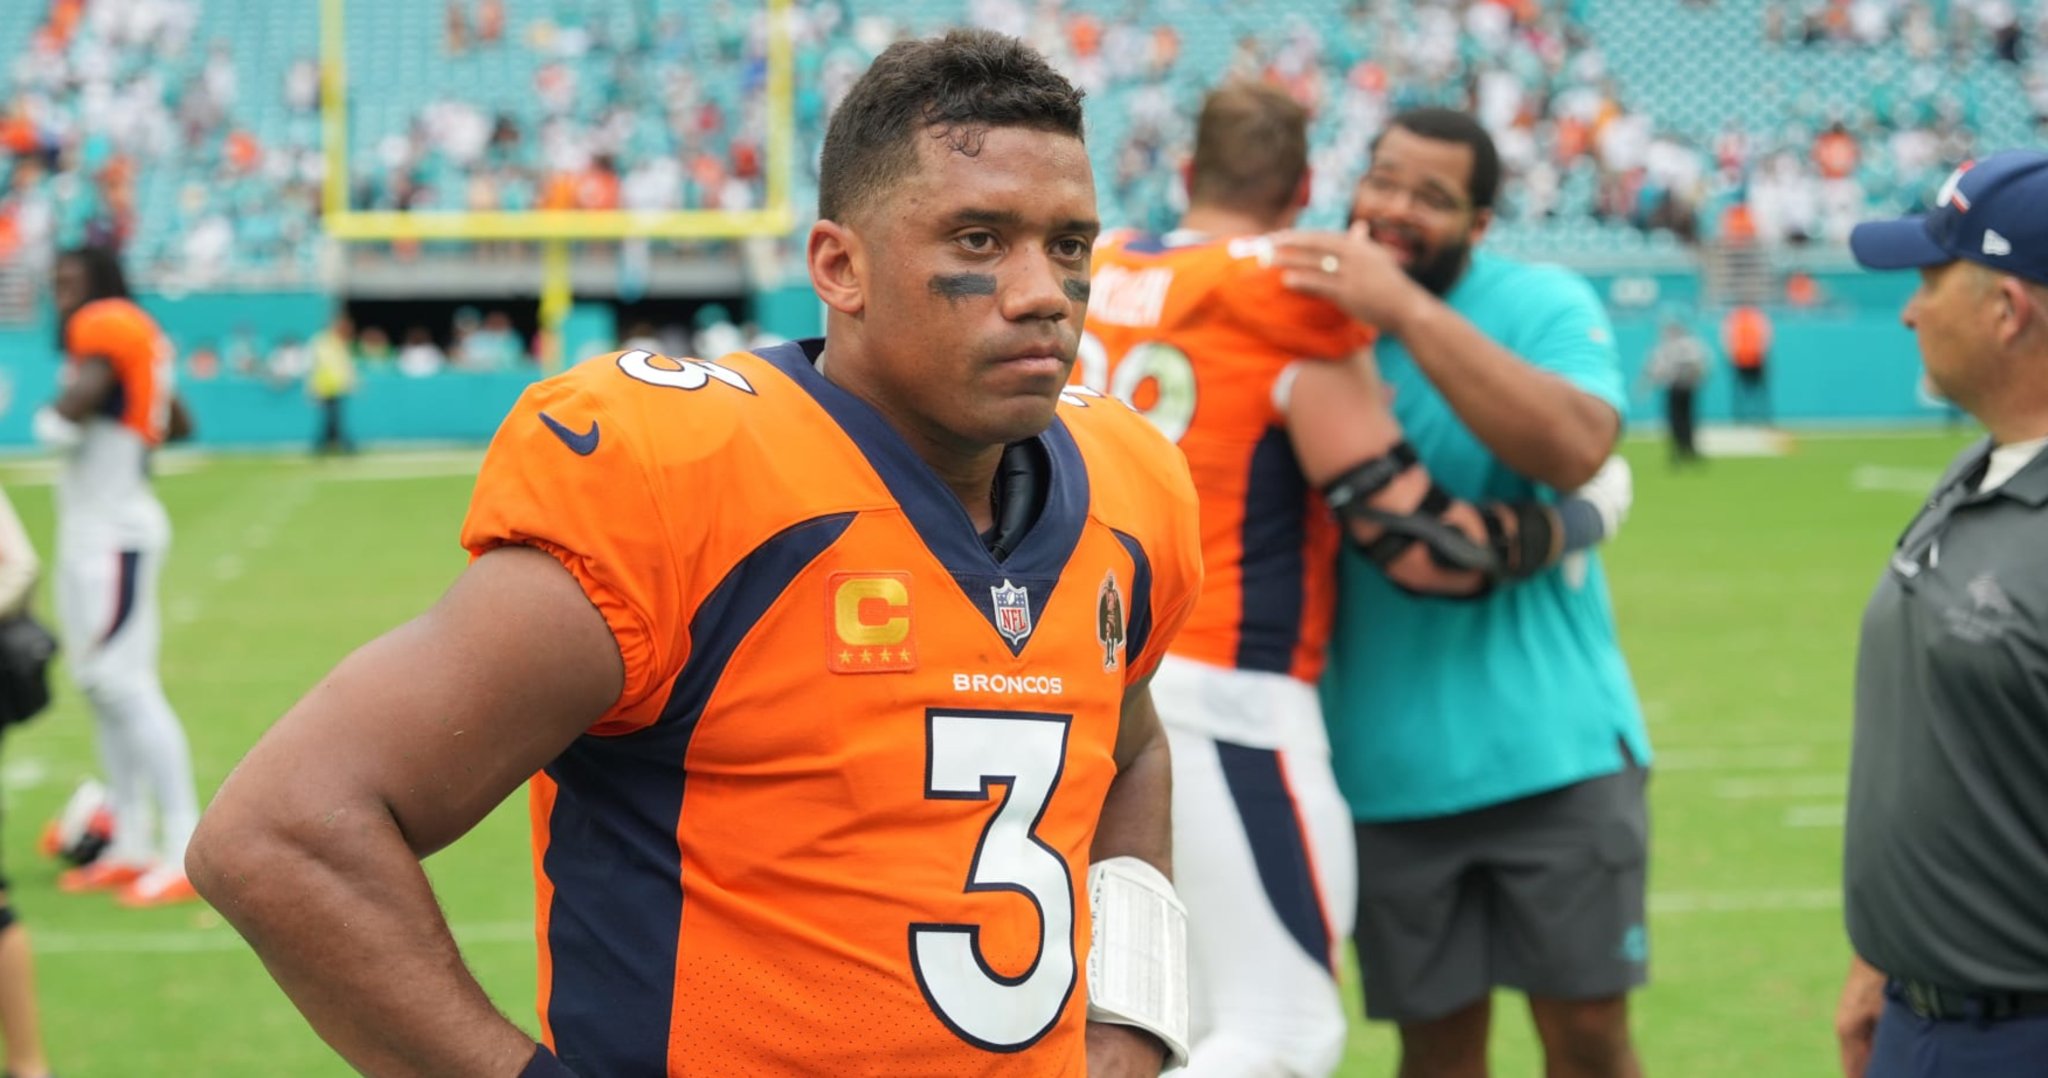 NFL Exec: Broncos' Russell Wilson Needs to 'Play Phenomenal to Avoid Getting Benched'